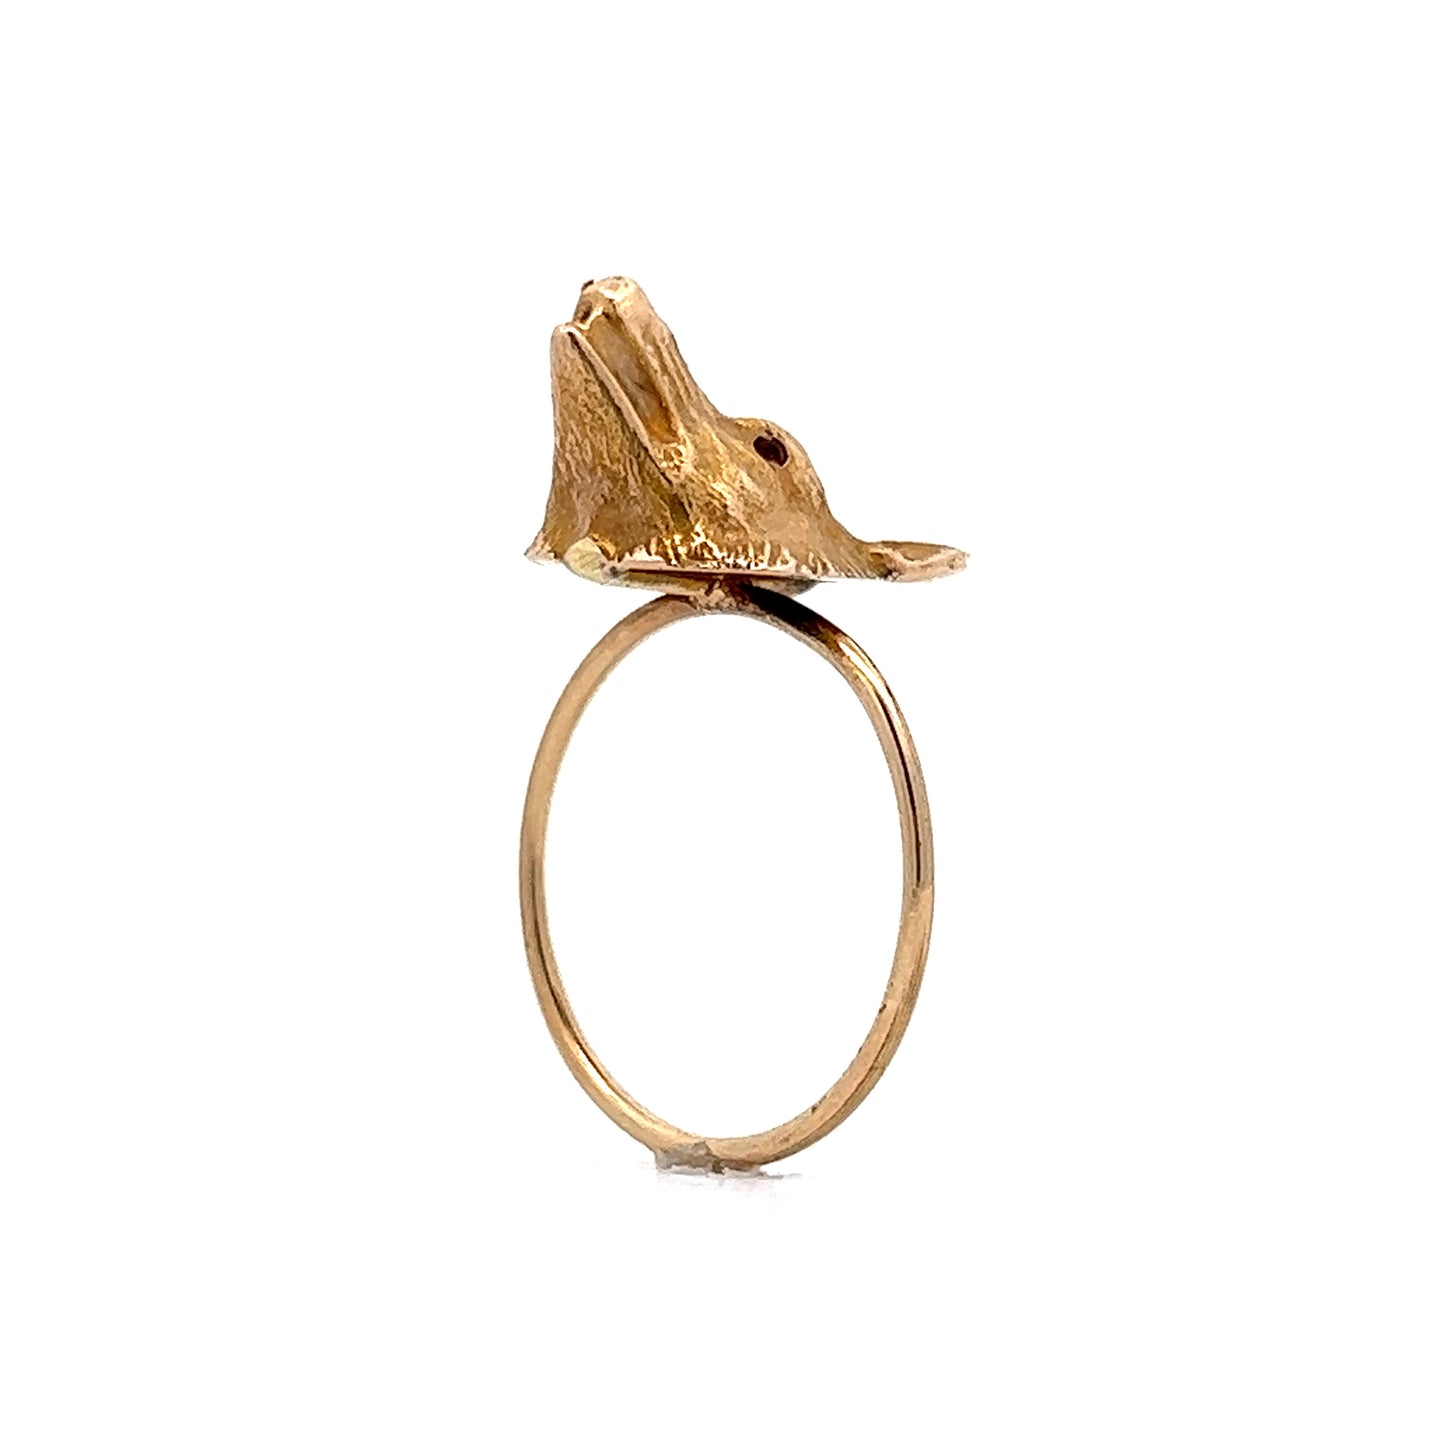 Vintage Victorian Fox Ring w/ Rubies in 14k Yellow Gold